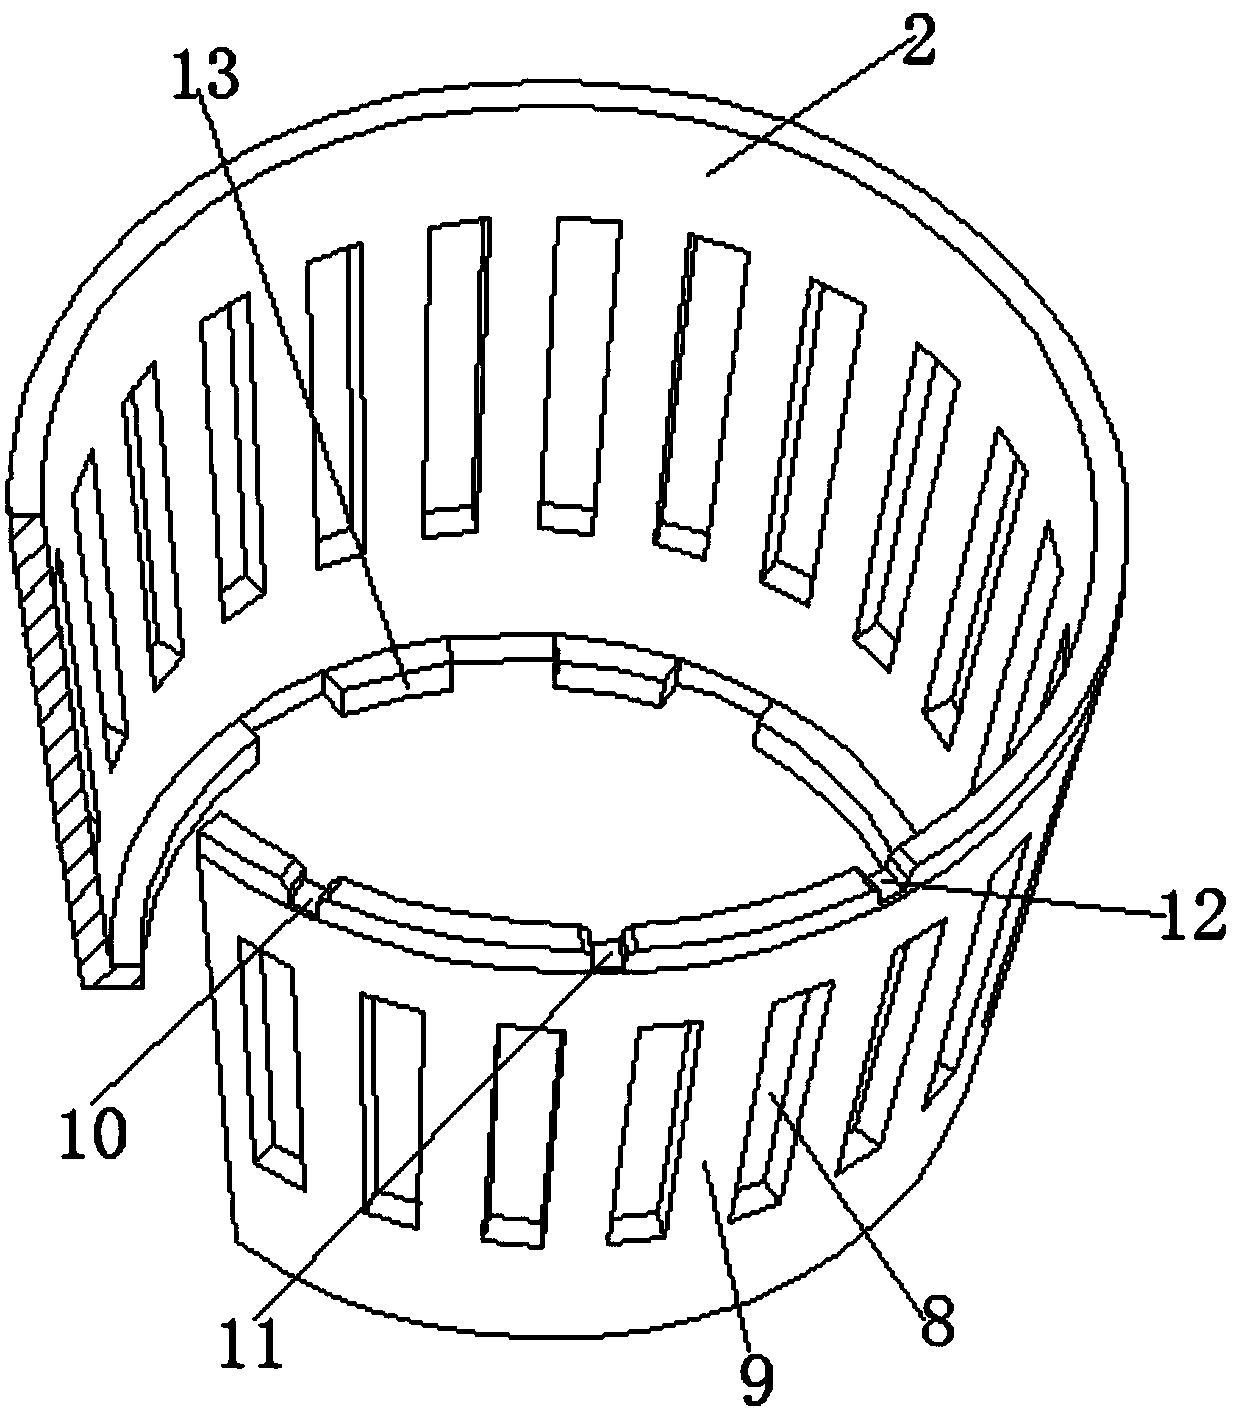 Filter net assembly and juice machine